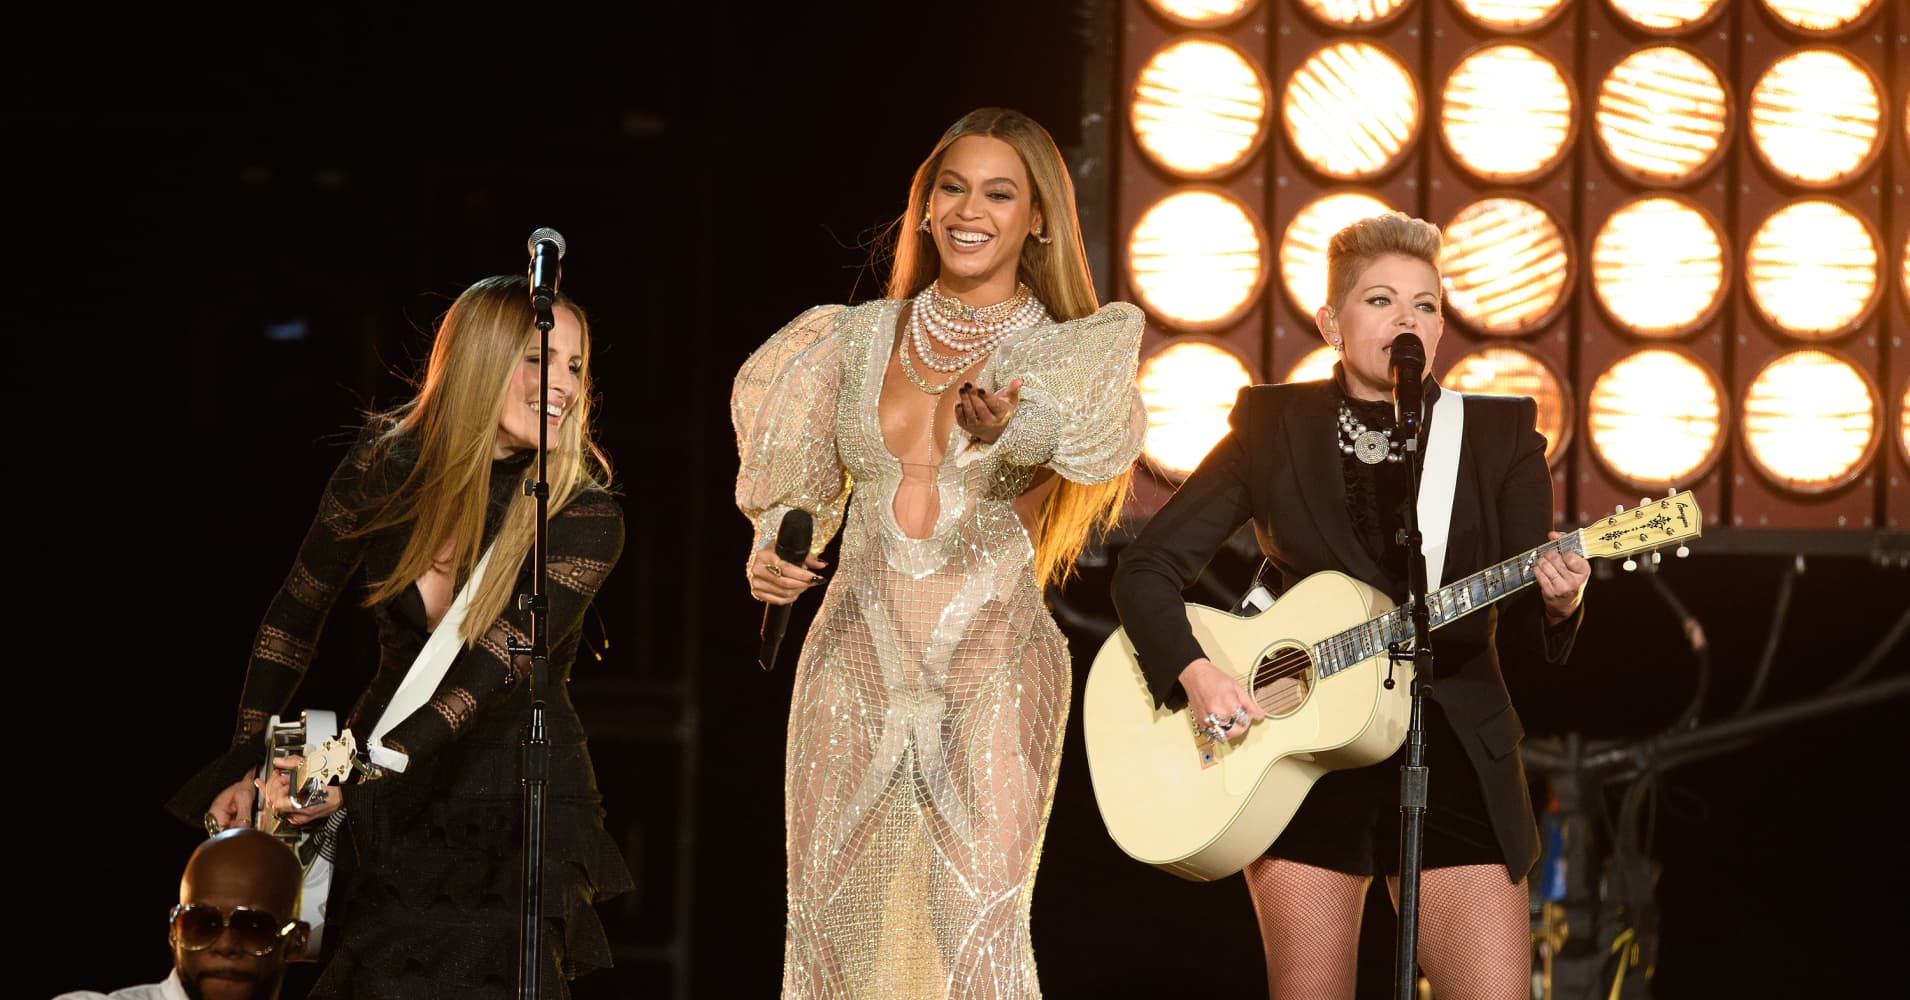 beyoncé's first country music foray drew harsh criticism—here's how she used it to craft a no. 1 single